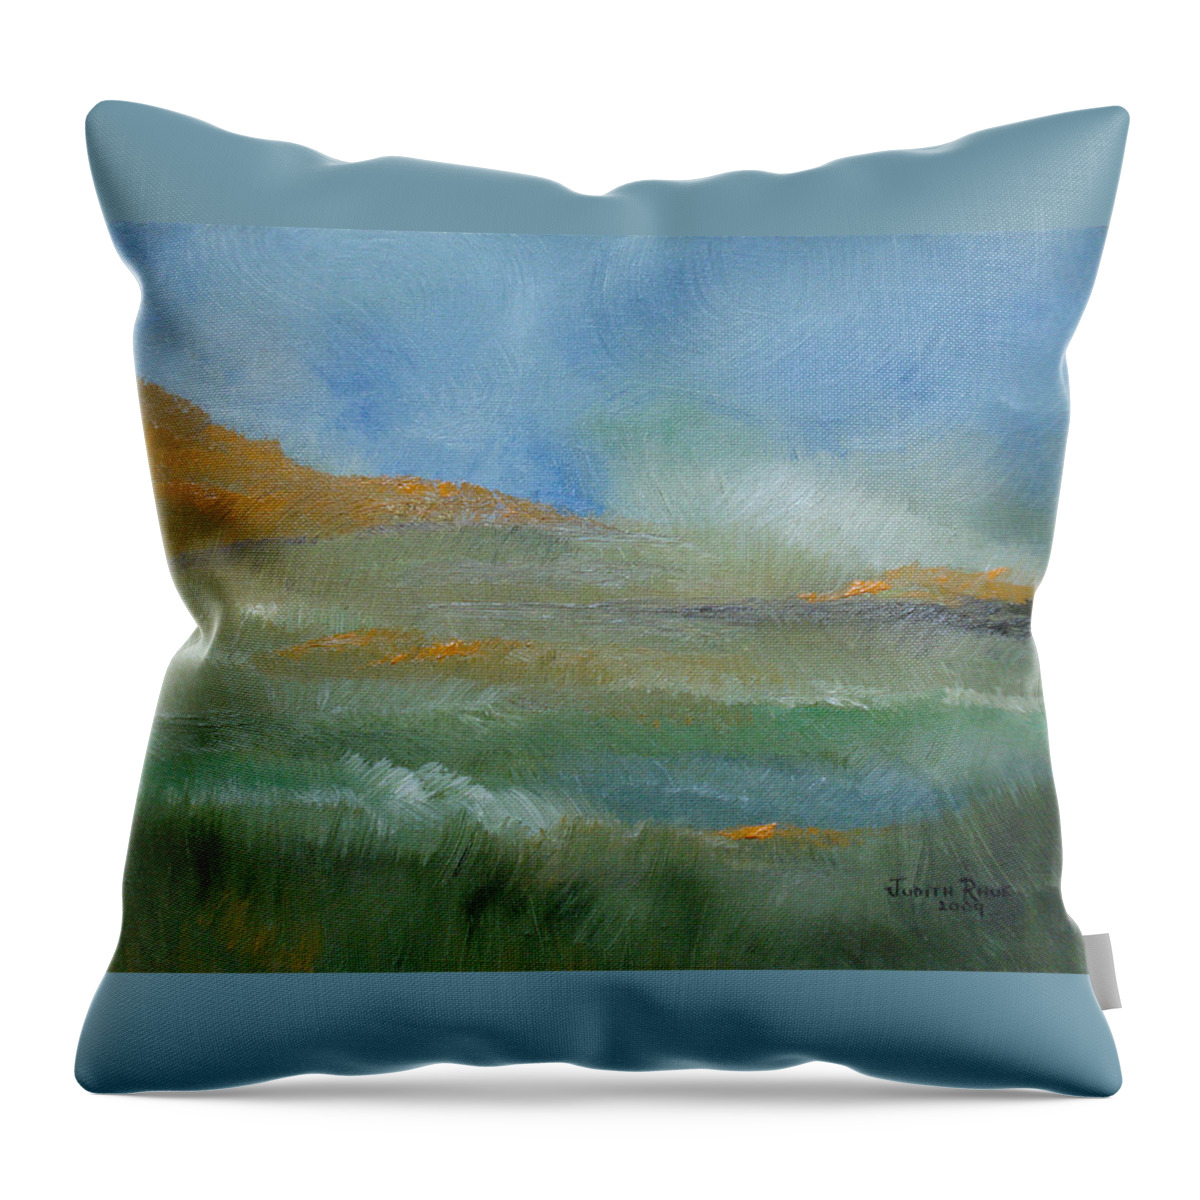 Landscape Throw Pillow featuring the painting Misty Morning by Judith Rhue